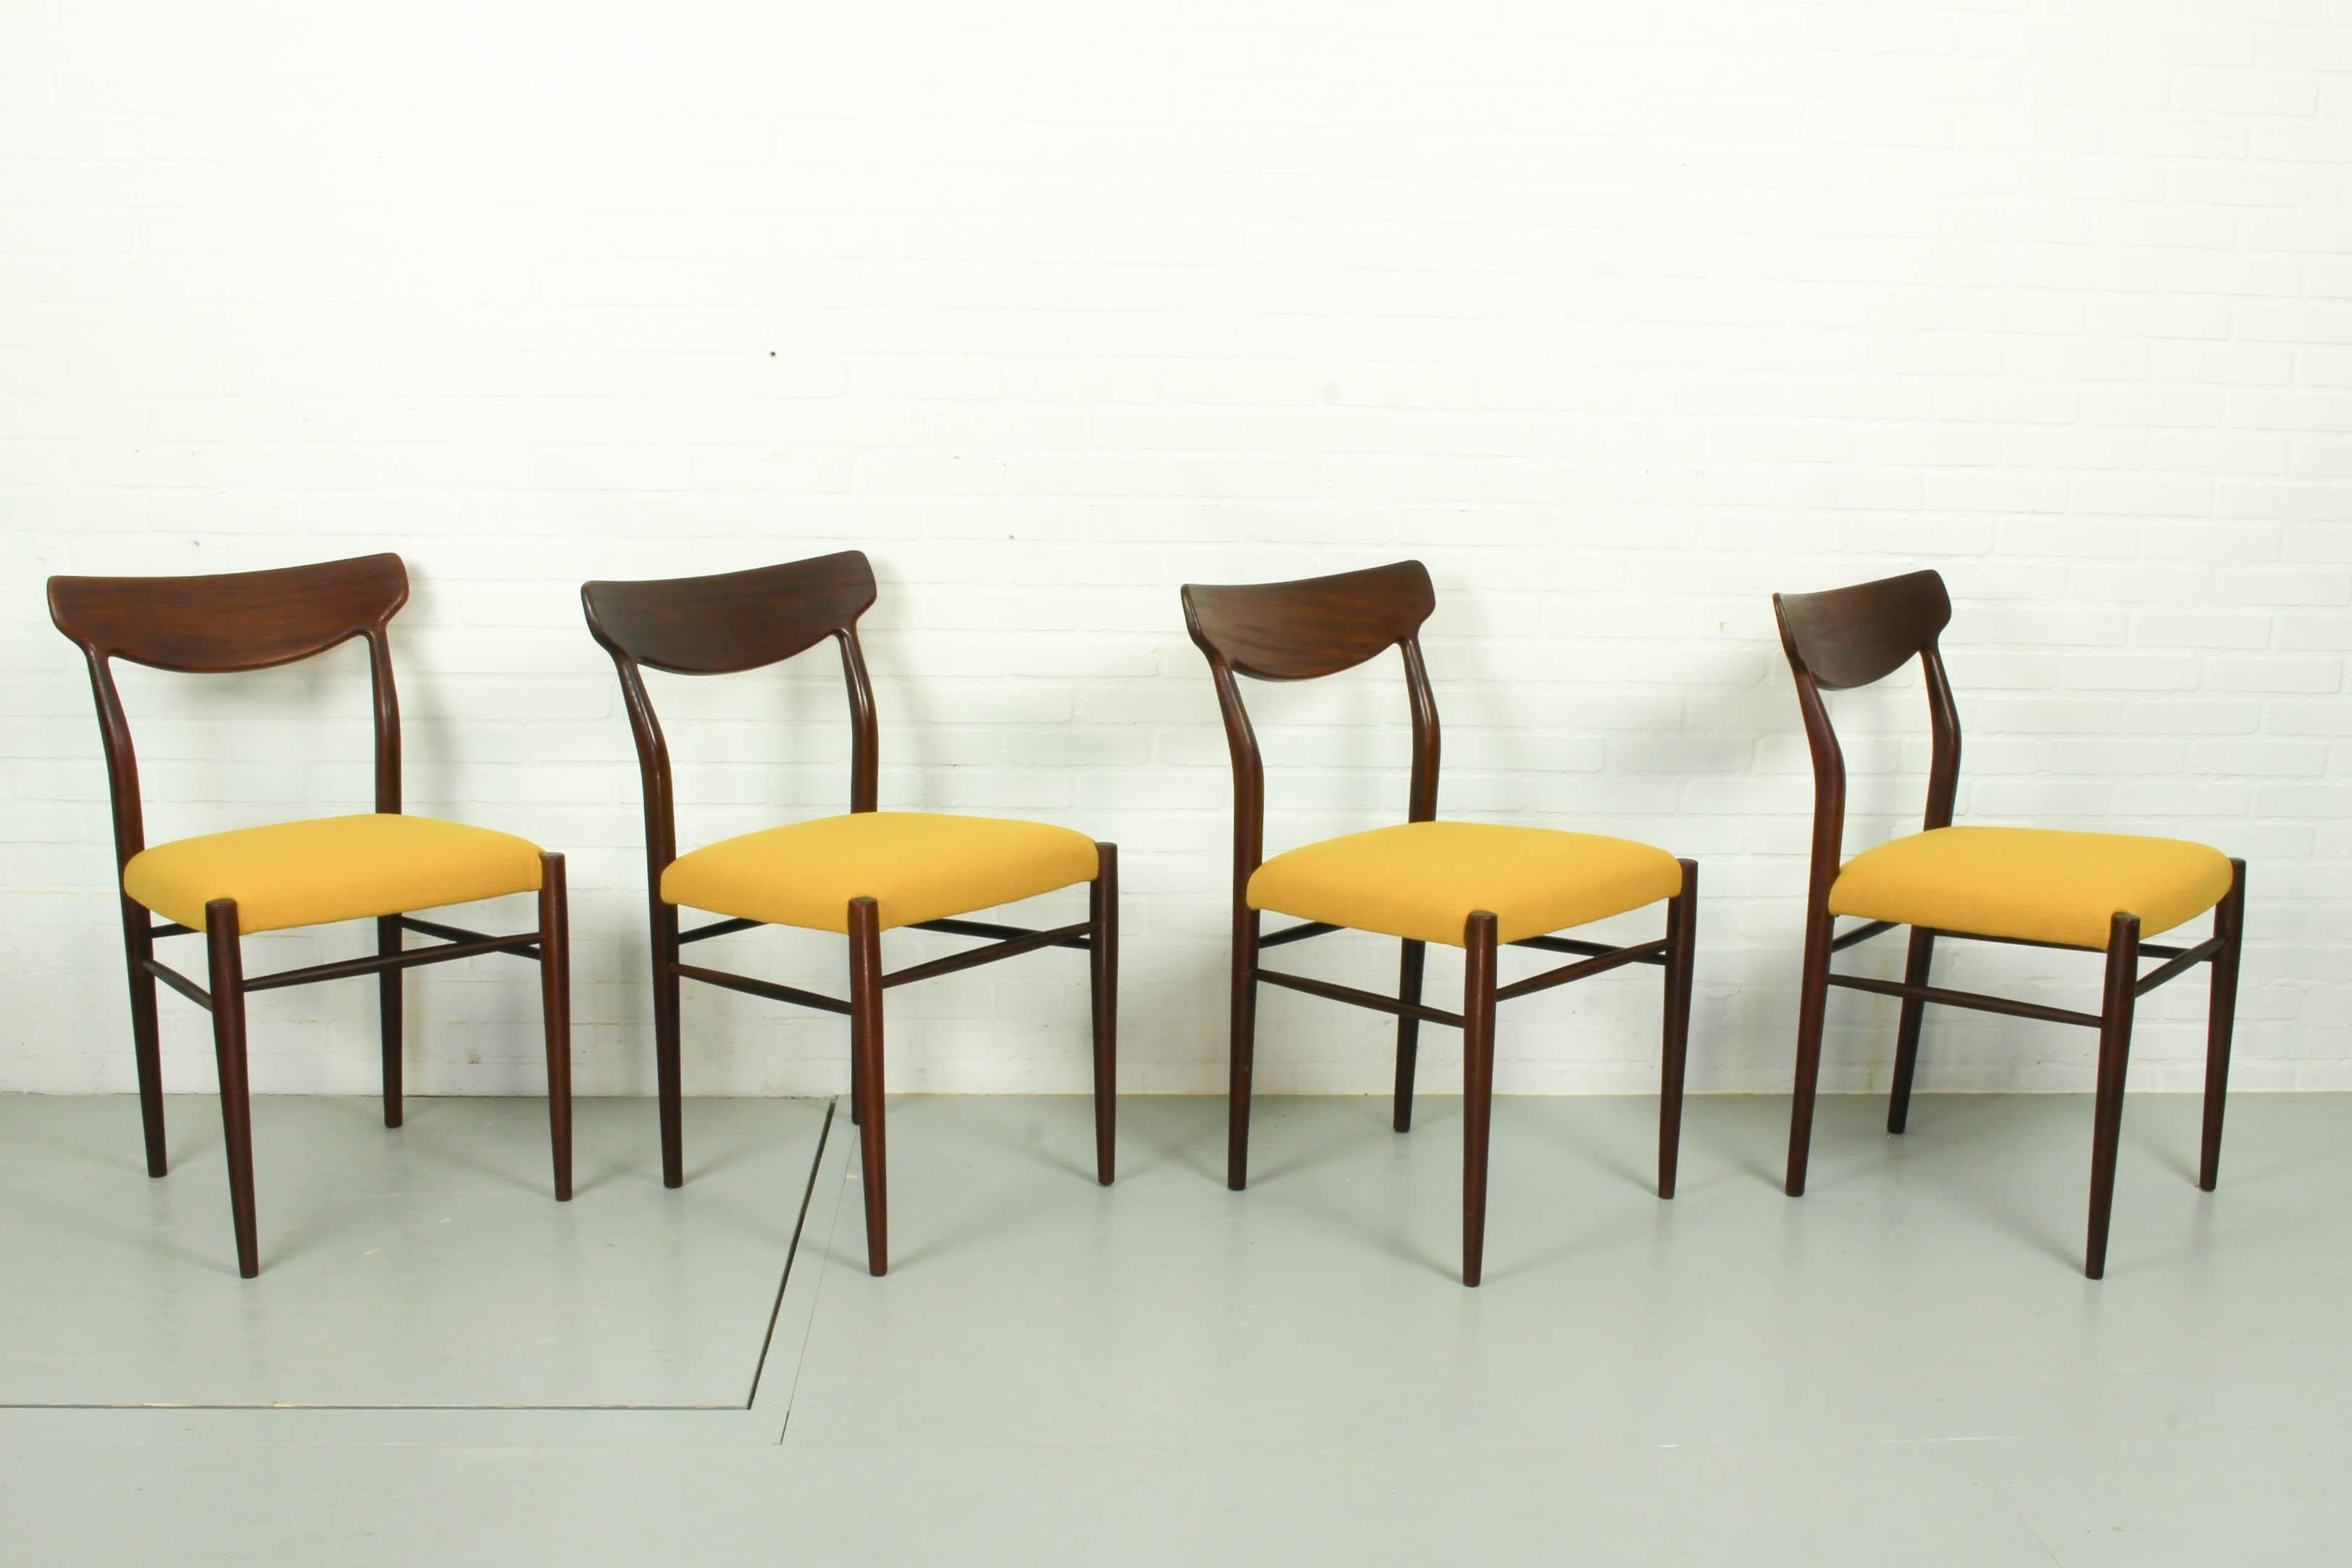 Beautiful dining chairs in teak designed by Harry Ostergaard for Randers Mobelfabrik, Denmark 1950s. The deep dark brown teak frames contrasts nicely with the new Kvadrat Hallingdal yellow upholstery. 

The dimensions are: 78cm H, 49cm W and 54cm